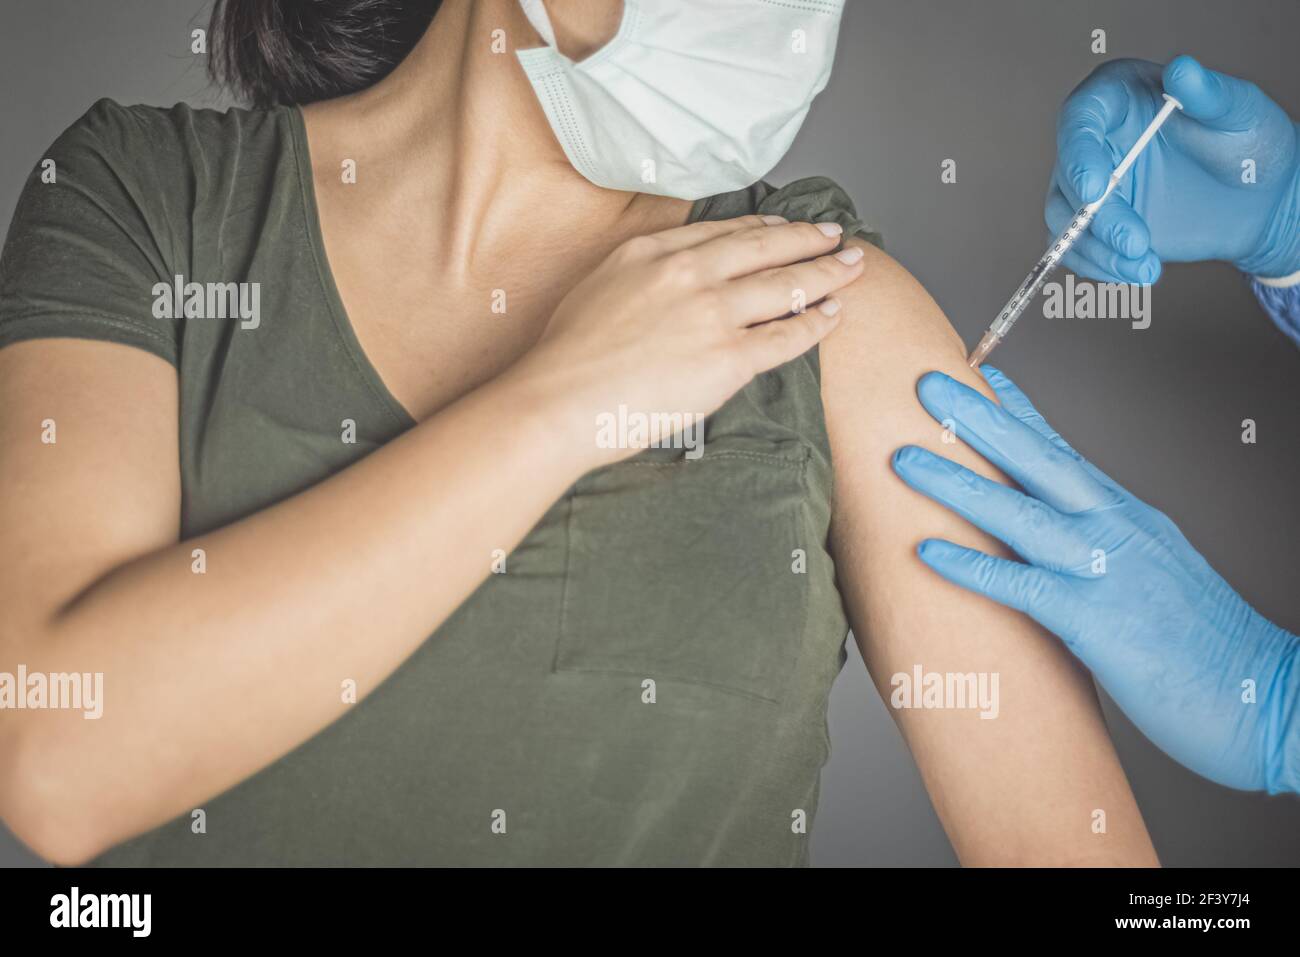 Coronavirus vaccine concept and background. Woman in medical face mask getting Covid-19 vaccine. Stock Photo